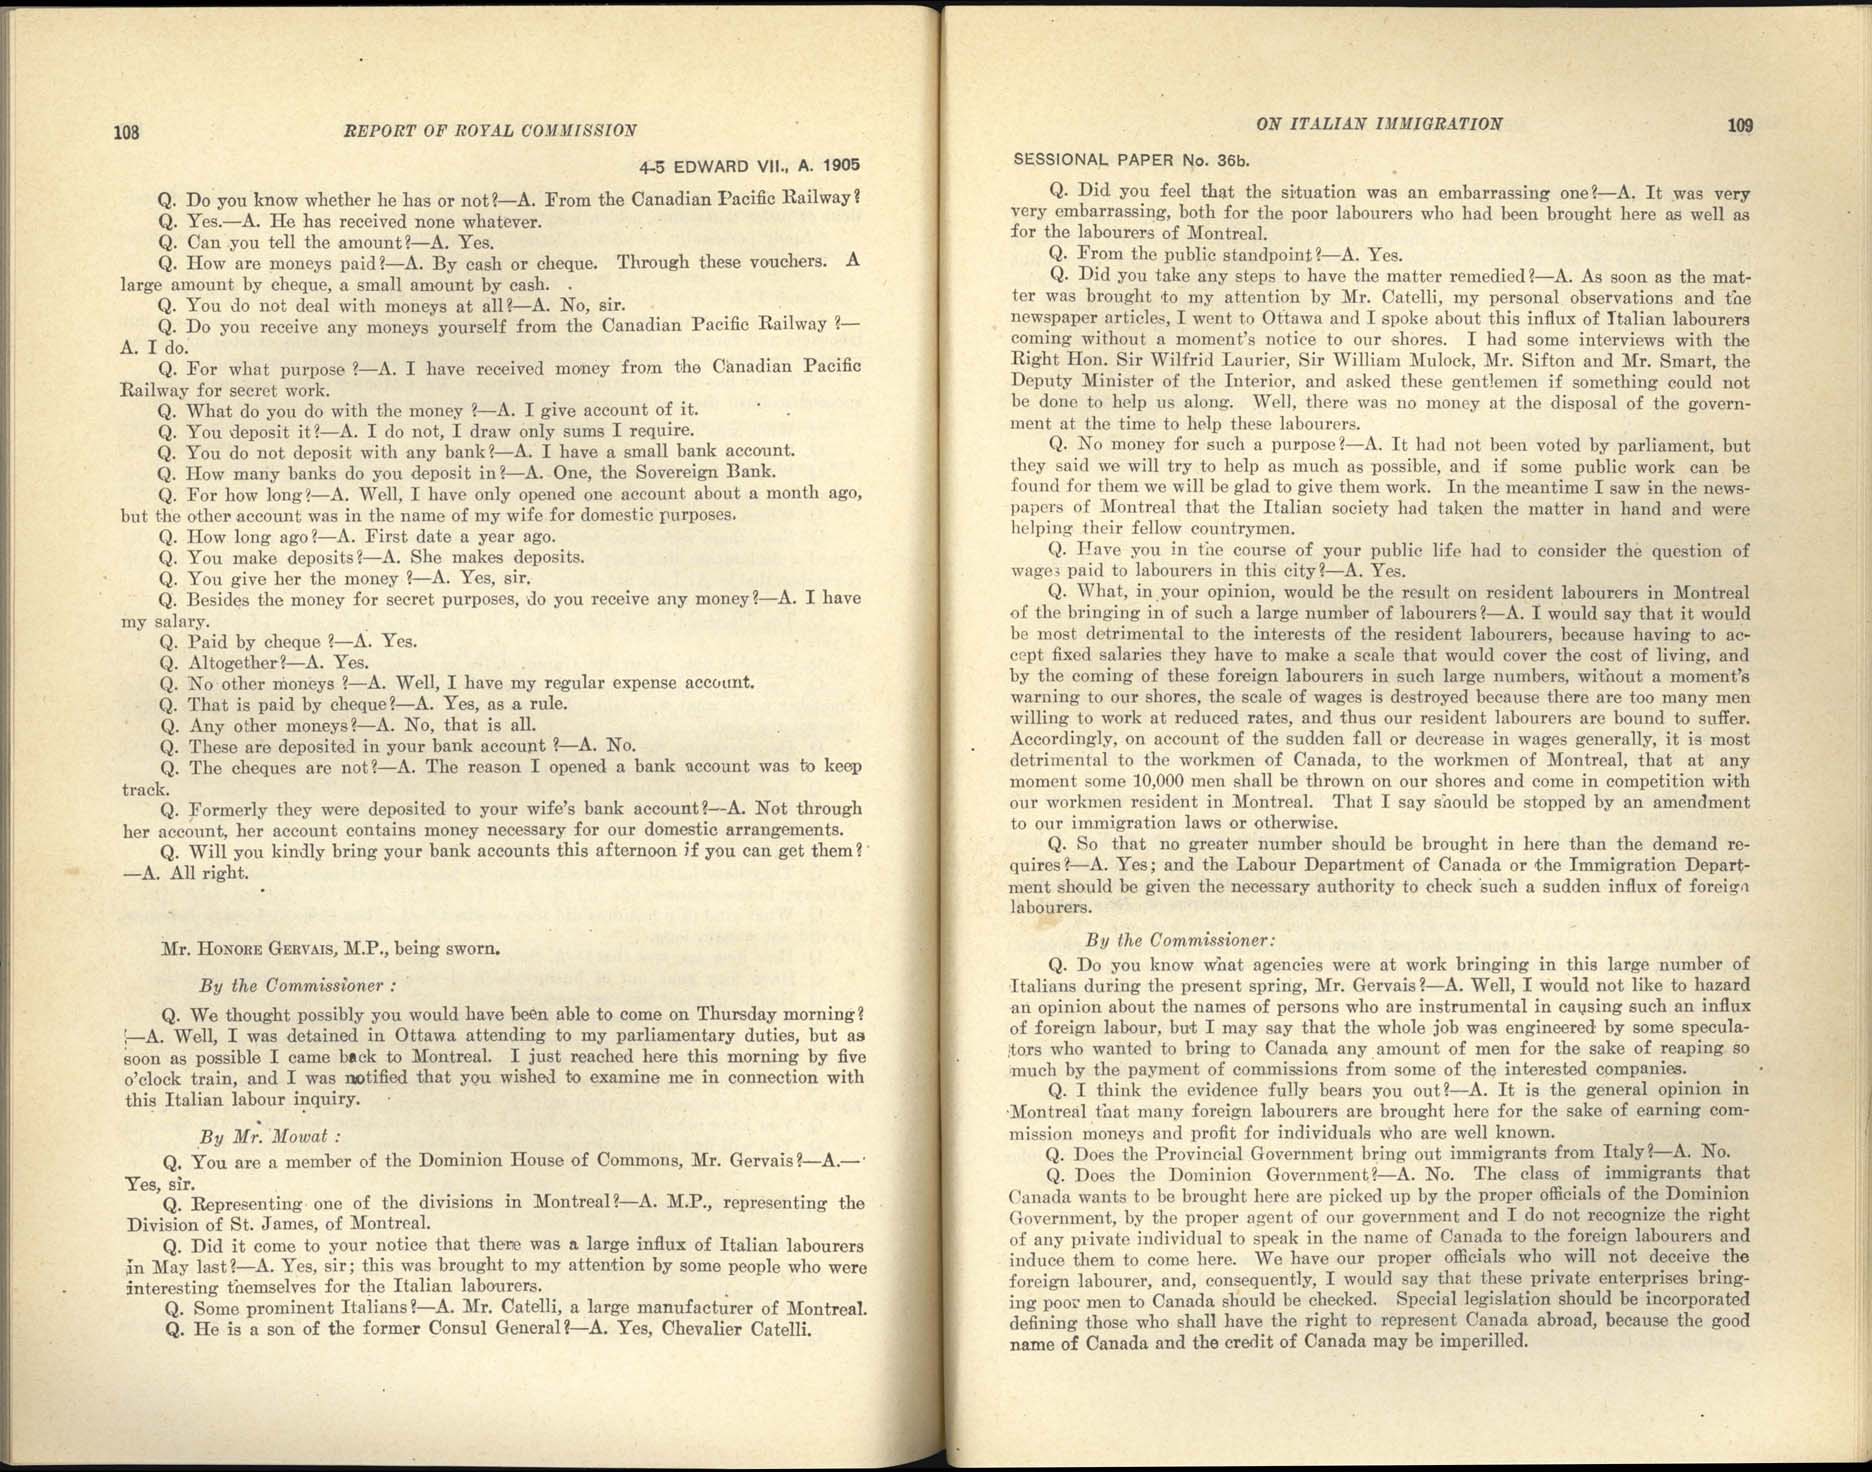 Page 108, 109 Royal Commission on Italian Immigration, 1904-1905